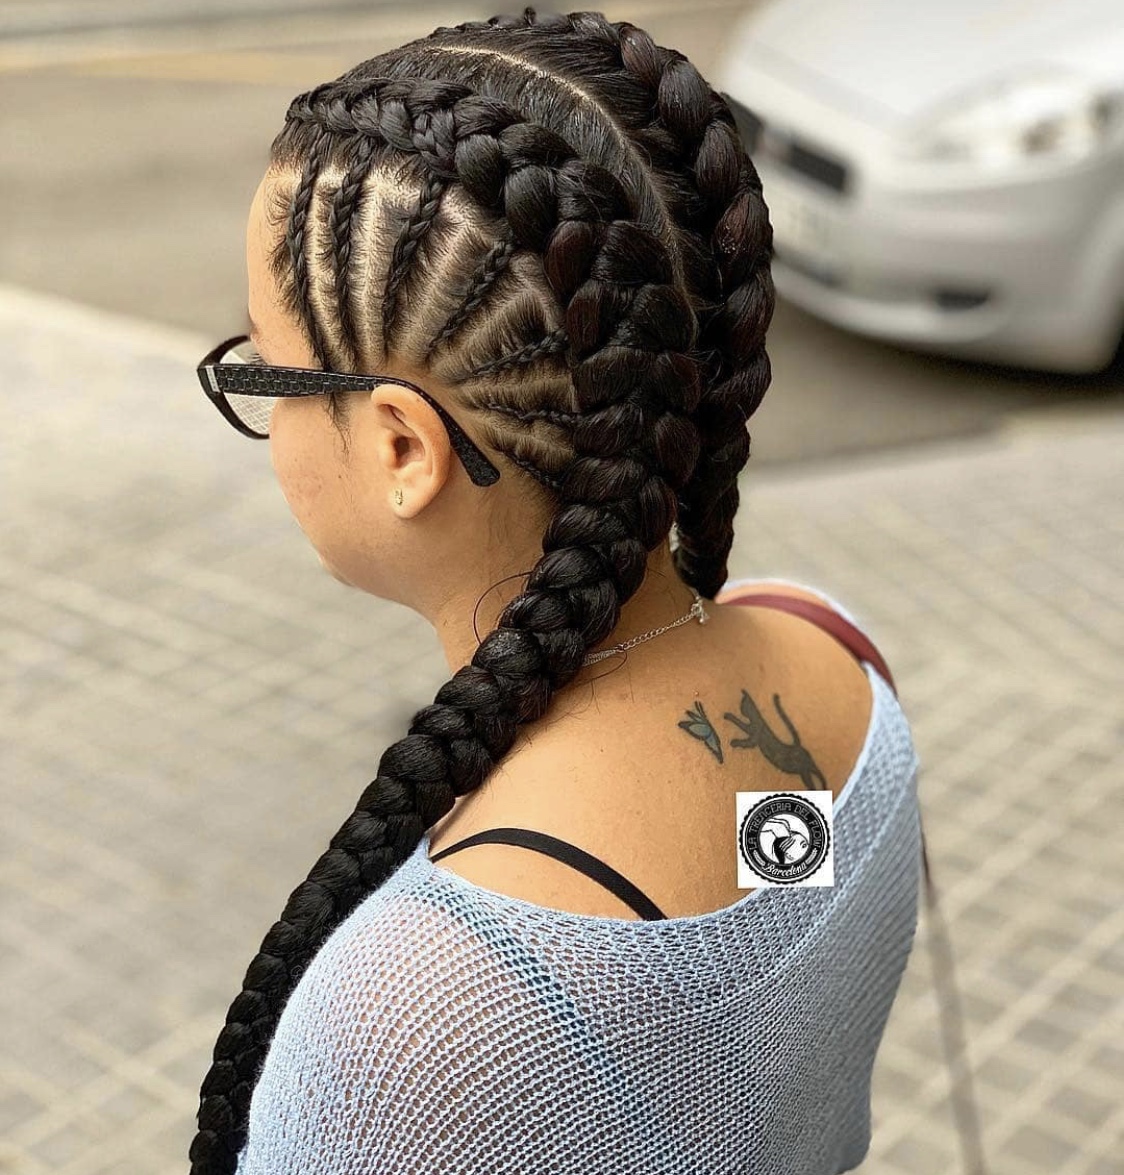 46 Gorgeous Braided Hairstyles For Black Women To Try In 2021 Honestlybecca 5707